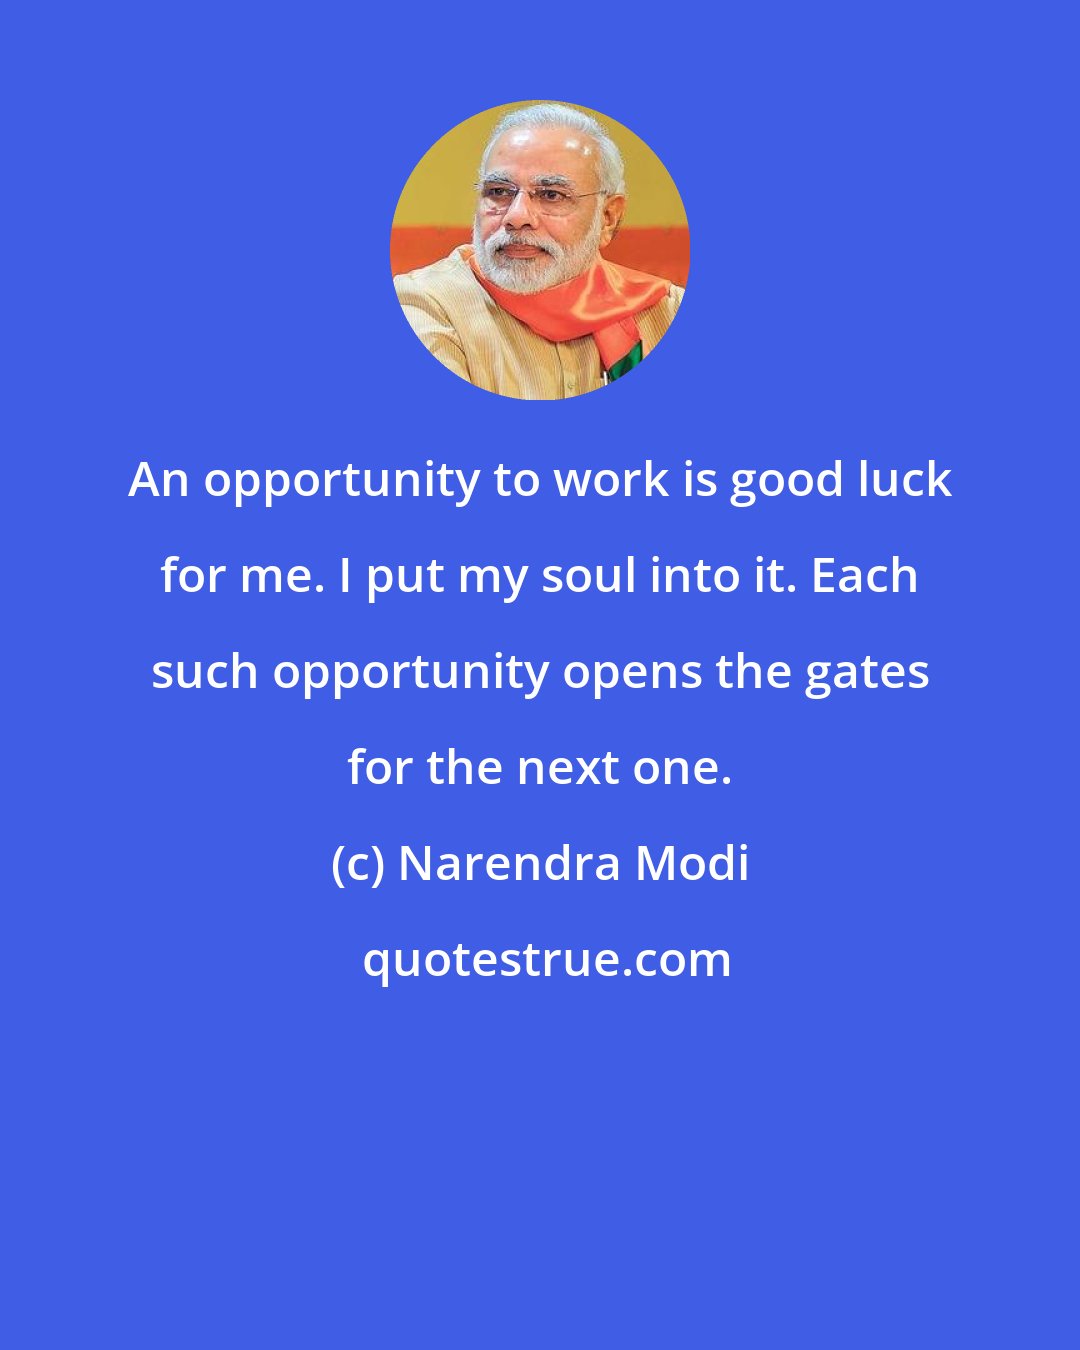 Narendra Modi: An opportunity to work is good luck for me. I put my soul into it. Each such opportunity opens the gates for the next one.